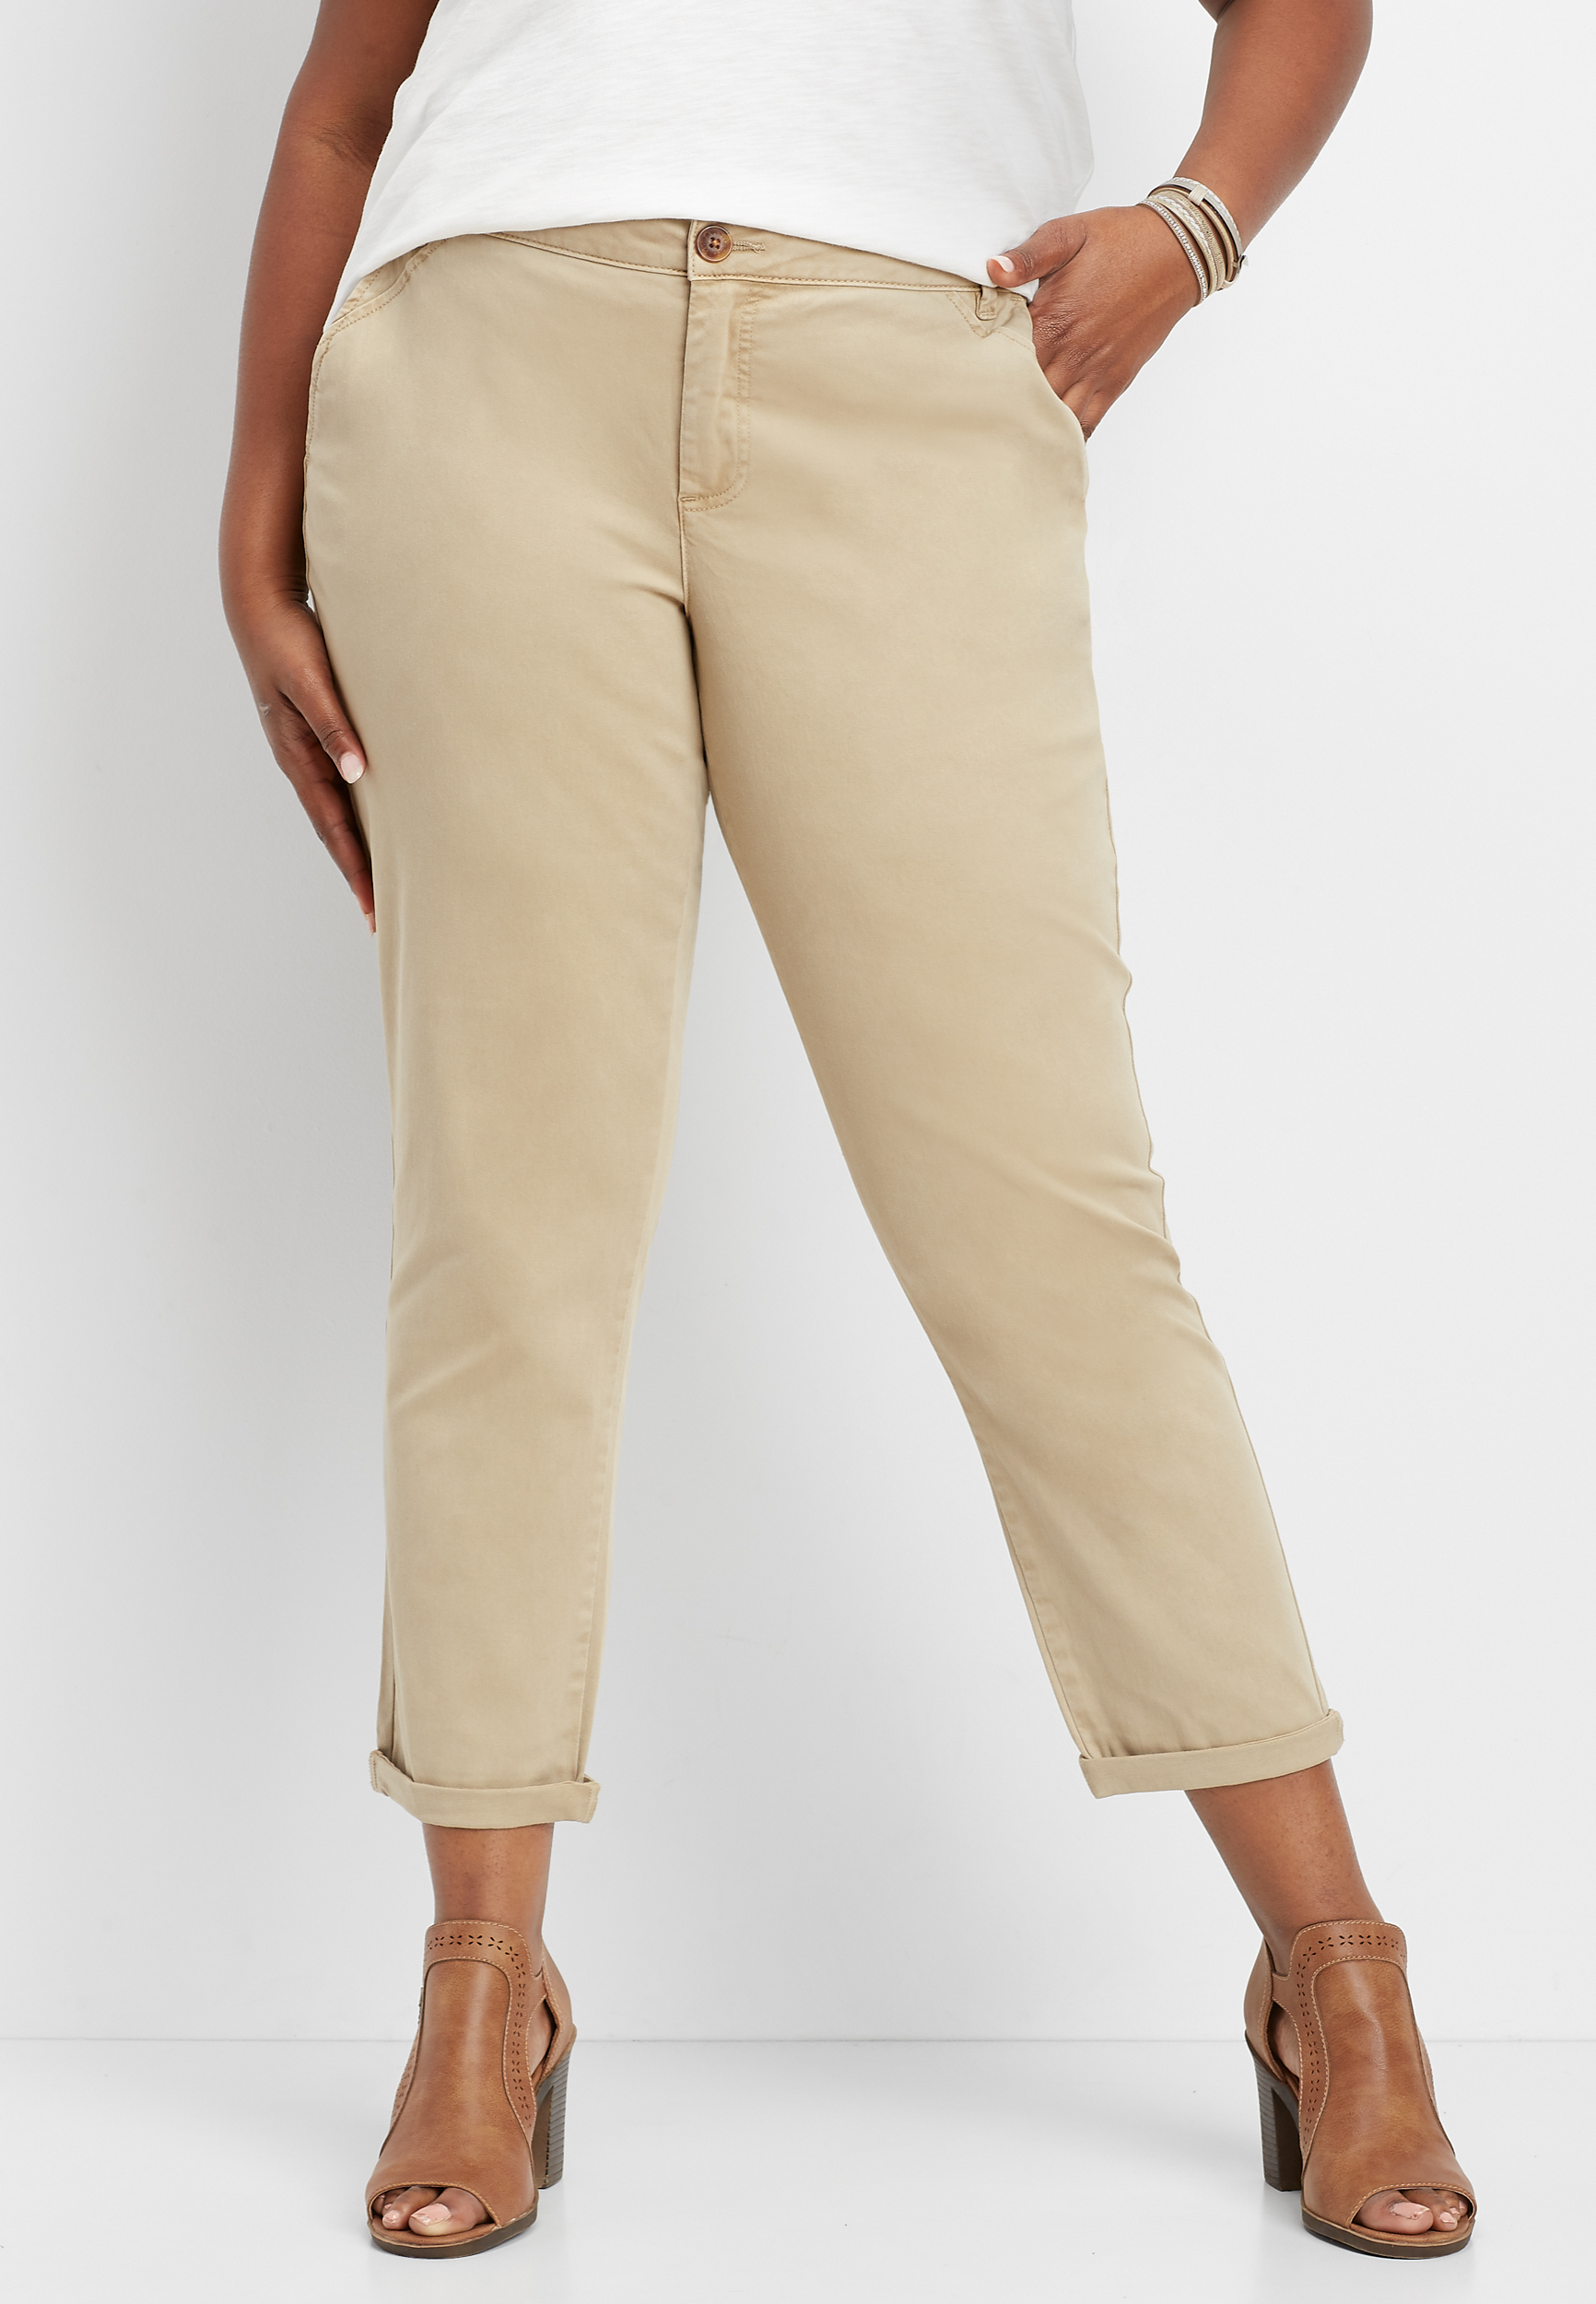 Plus Size Bottoms And Pants | maurices